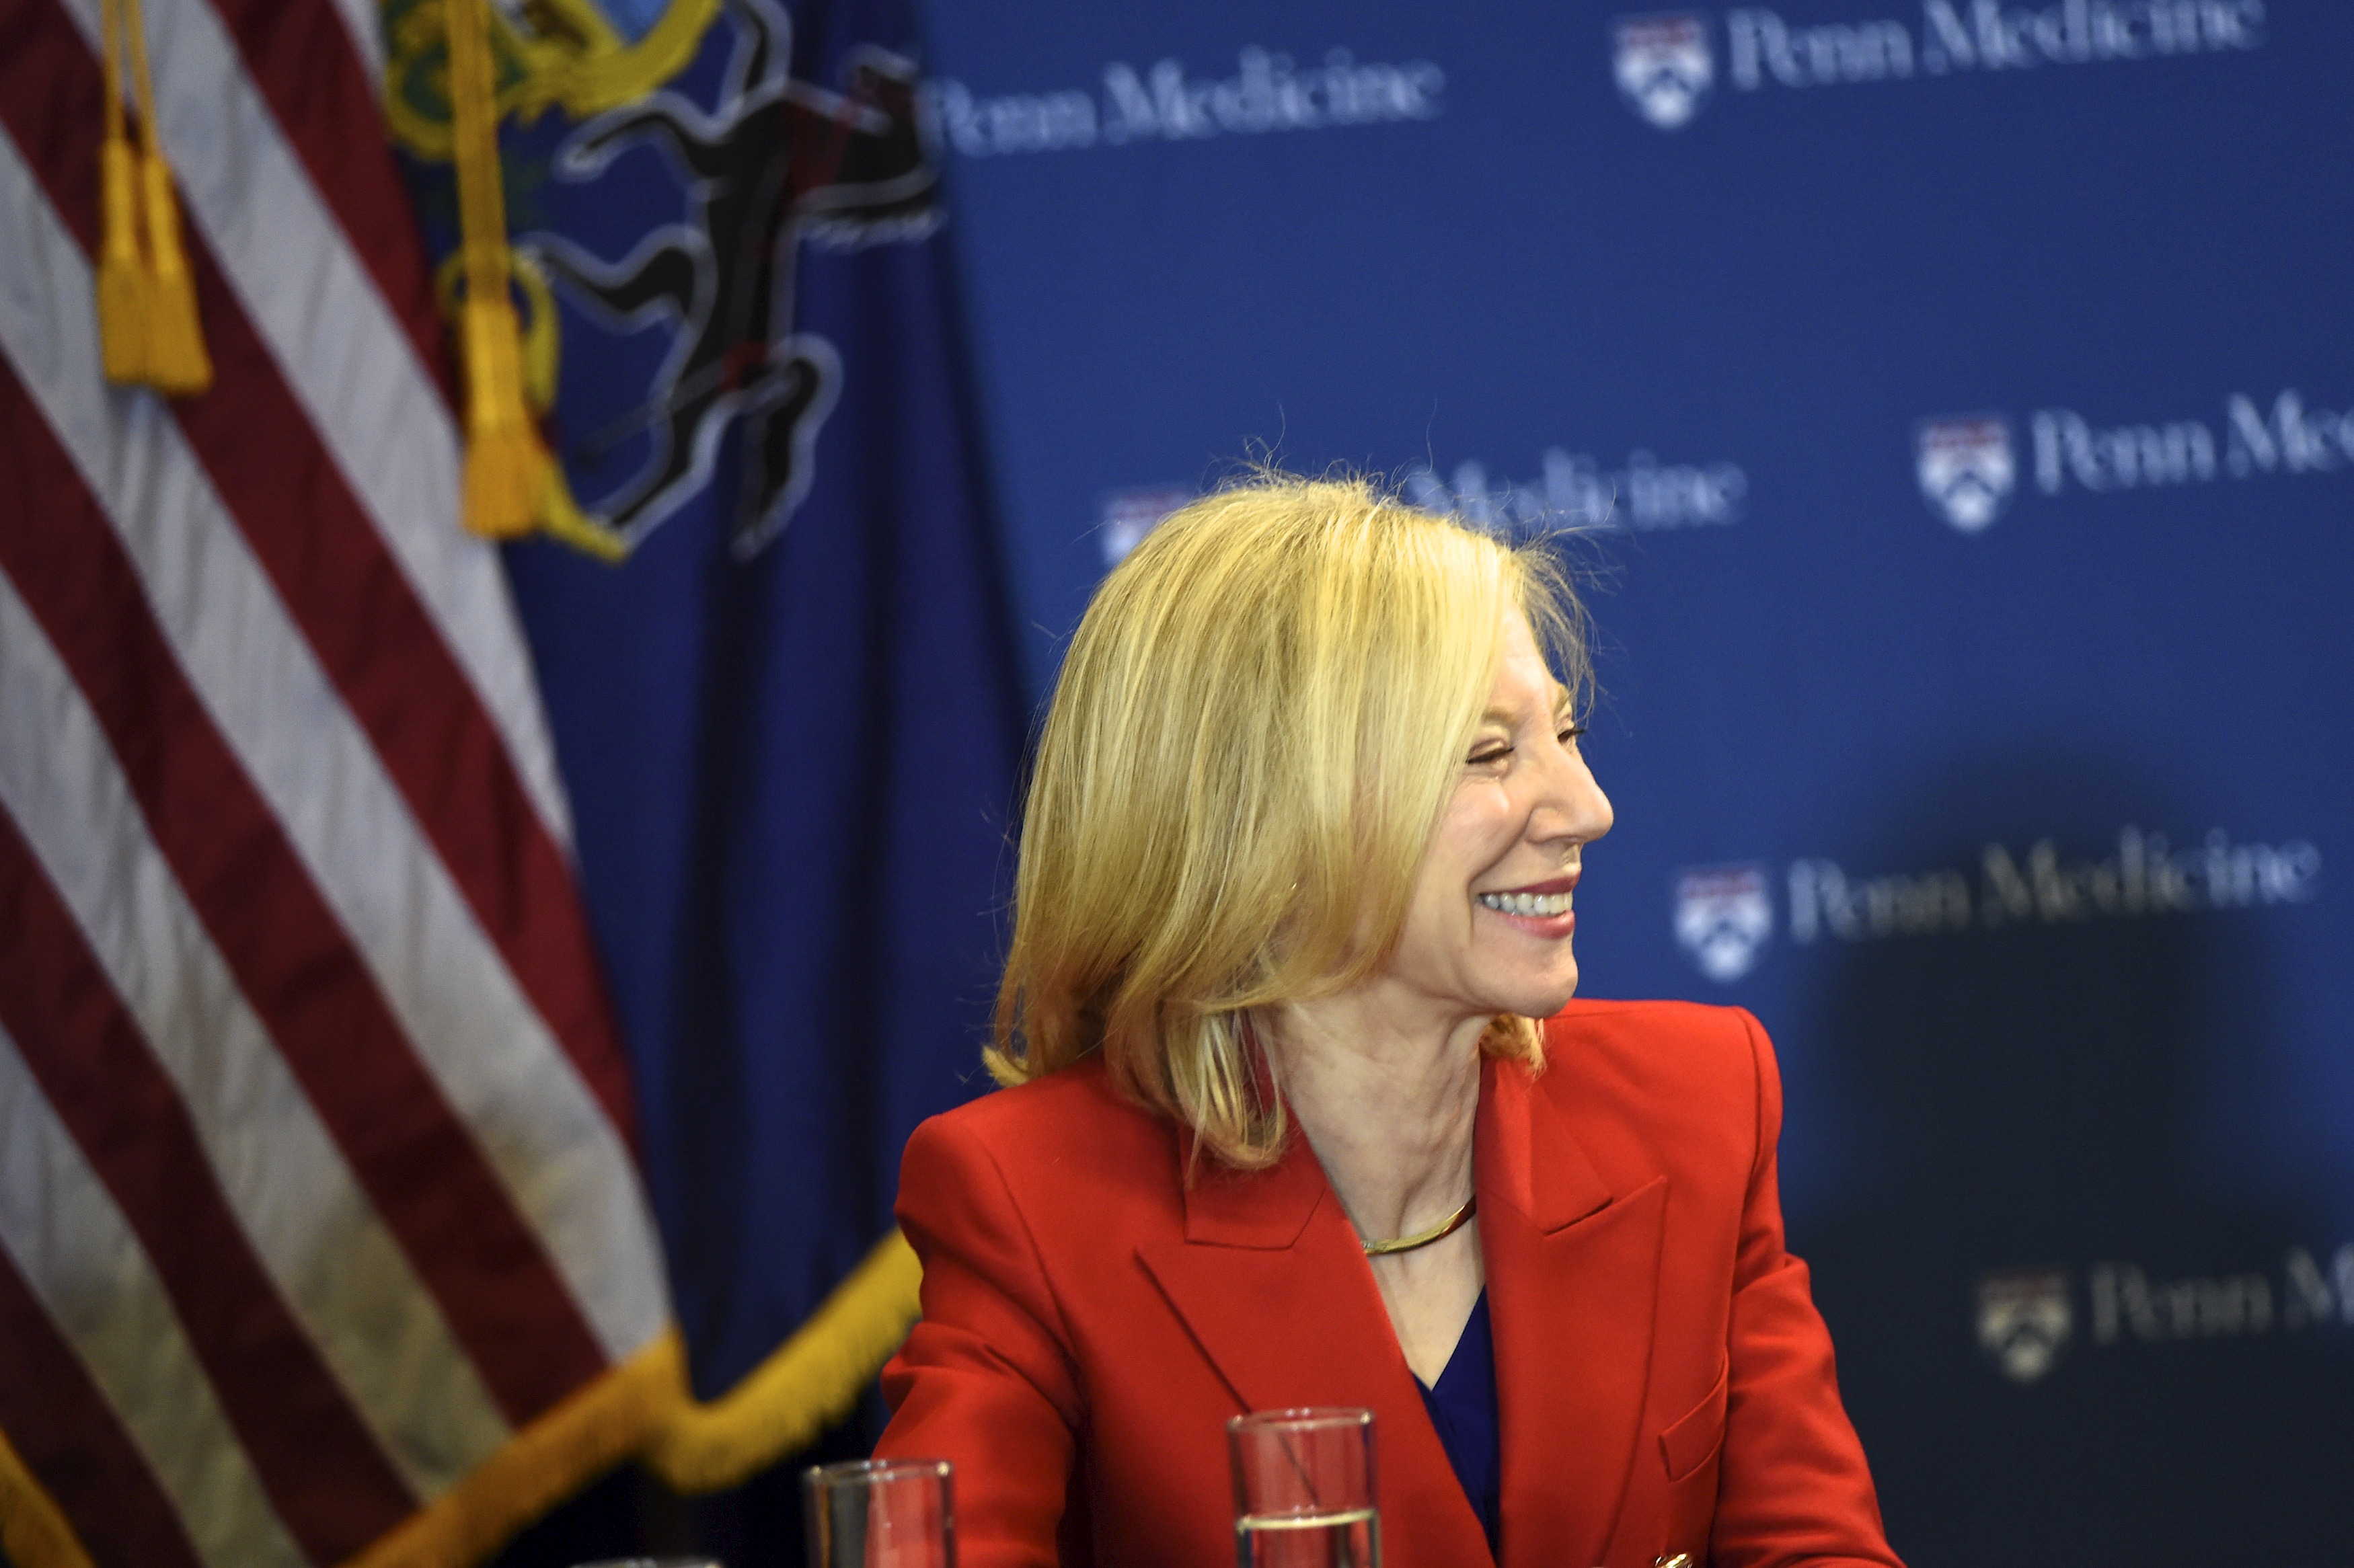 University of Pennsylvania President Amy Gutmann participates in a roundtable discussion with Vice President Joe Biden at the Perelman School of Medicine and Abramson Cancer Center in Philadelphia